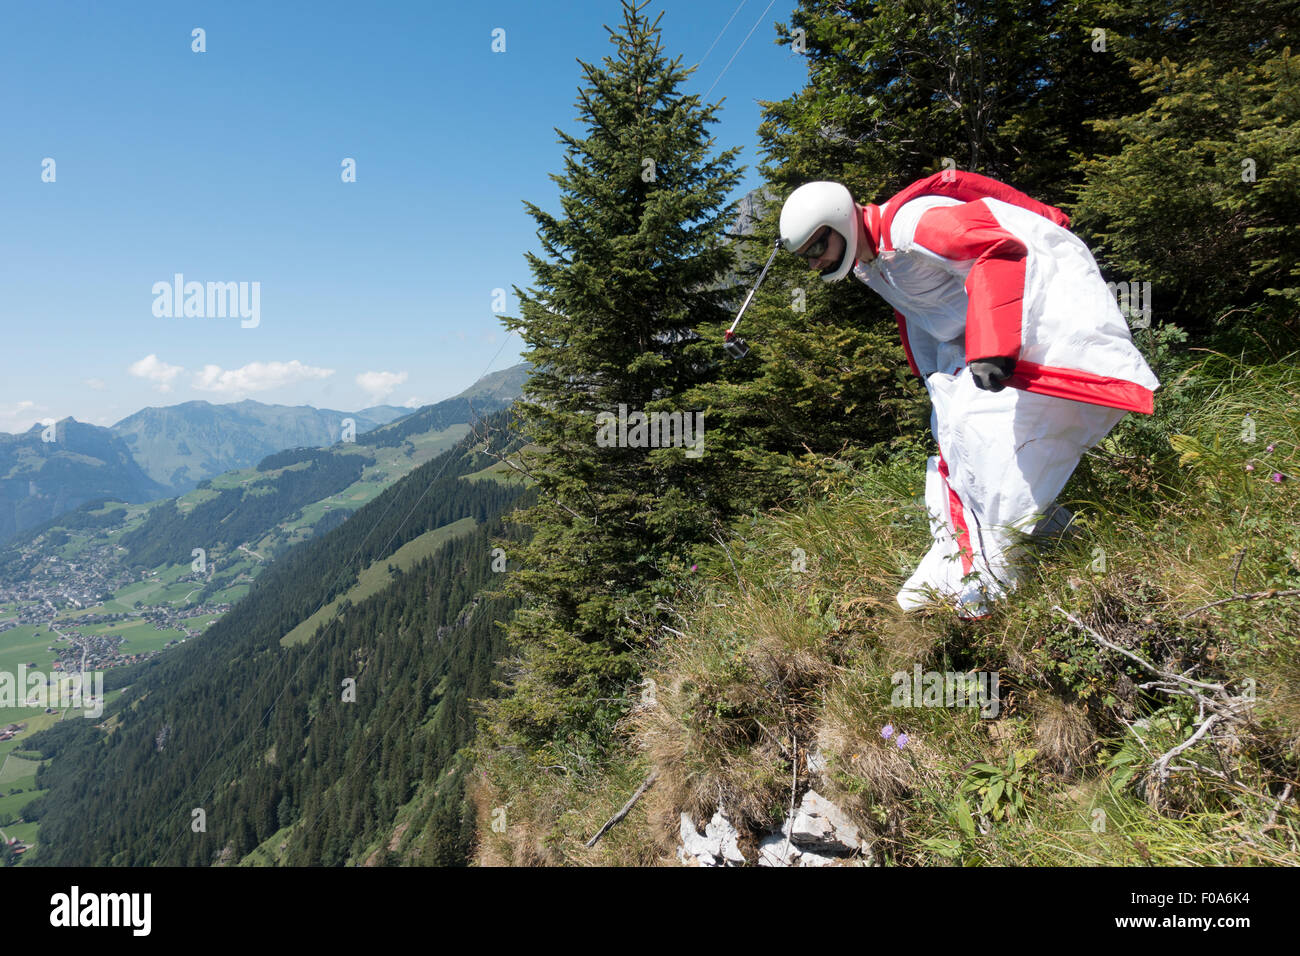 Wingsuit BASE jumper is getting ready to jump off a cliff and checking the altitude by facing downward & adjusting his wings. Stock Photo